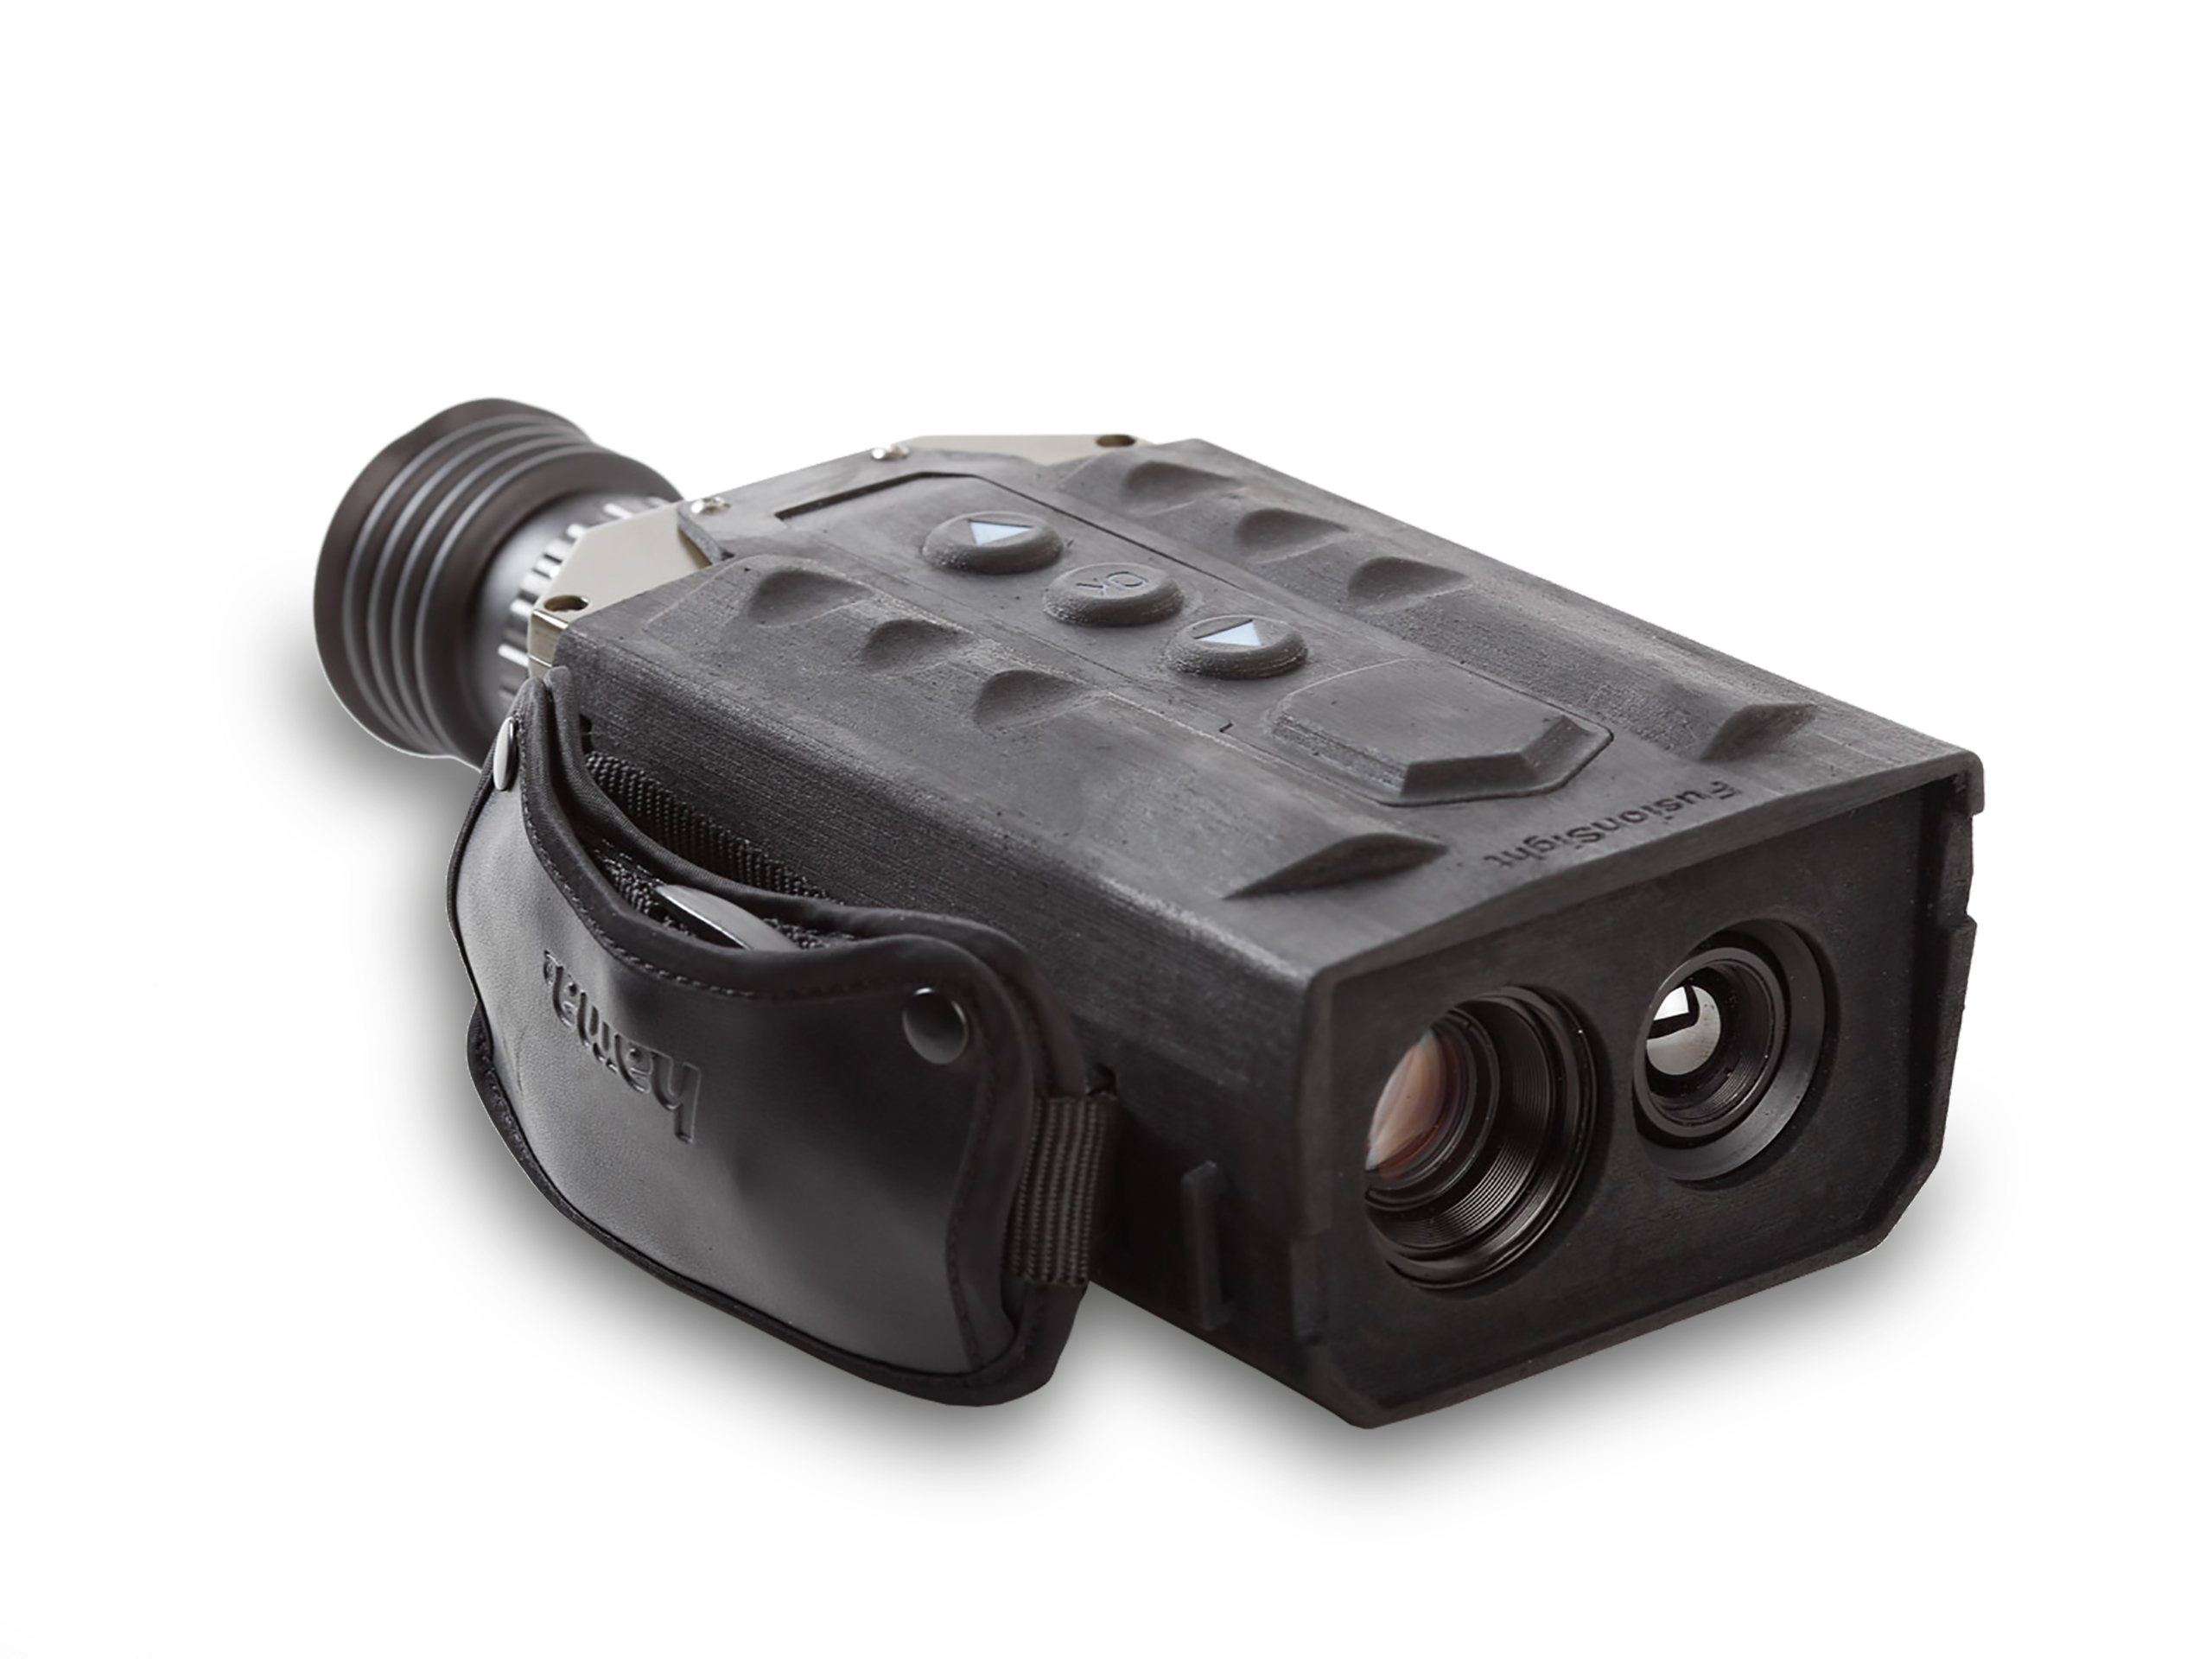 FusionSight observation device